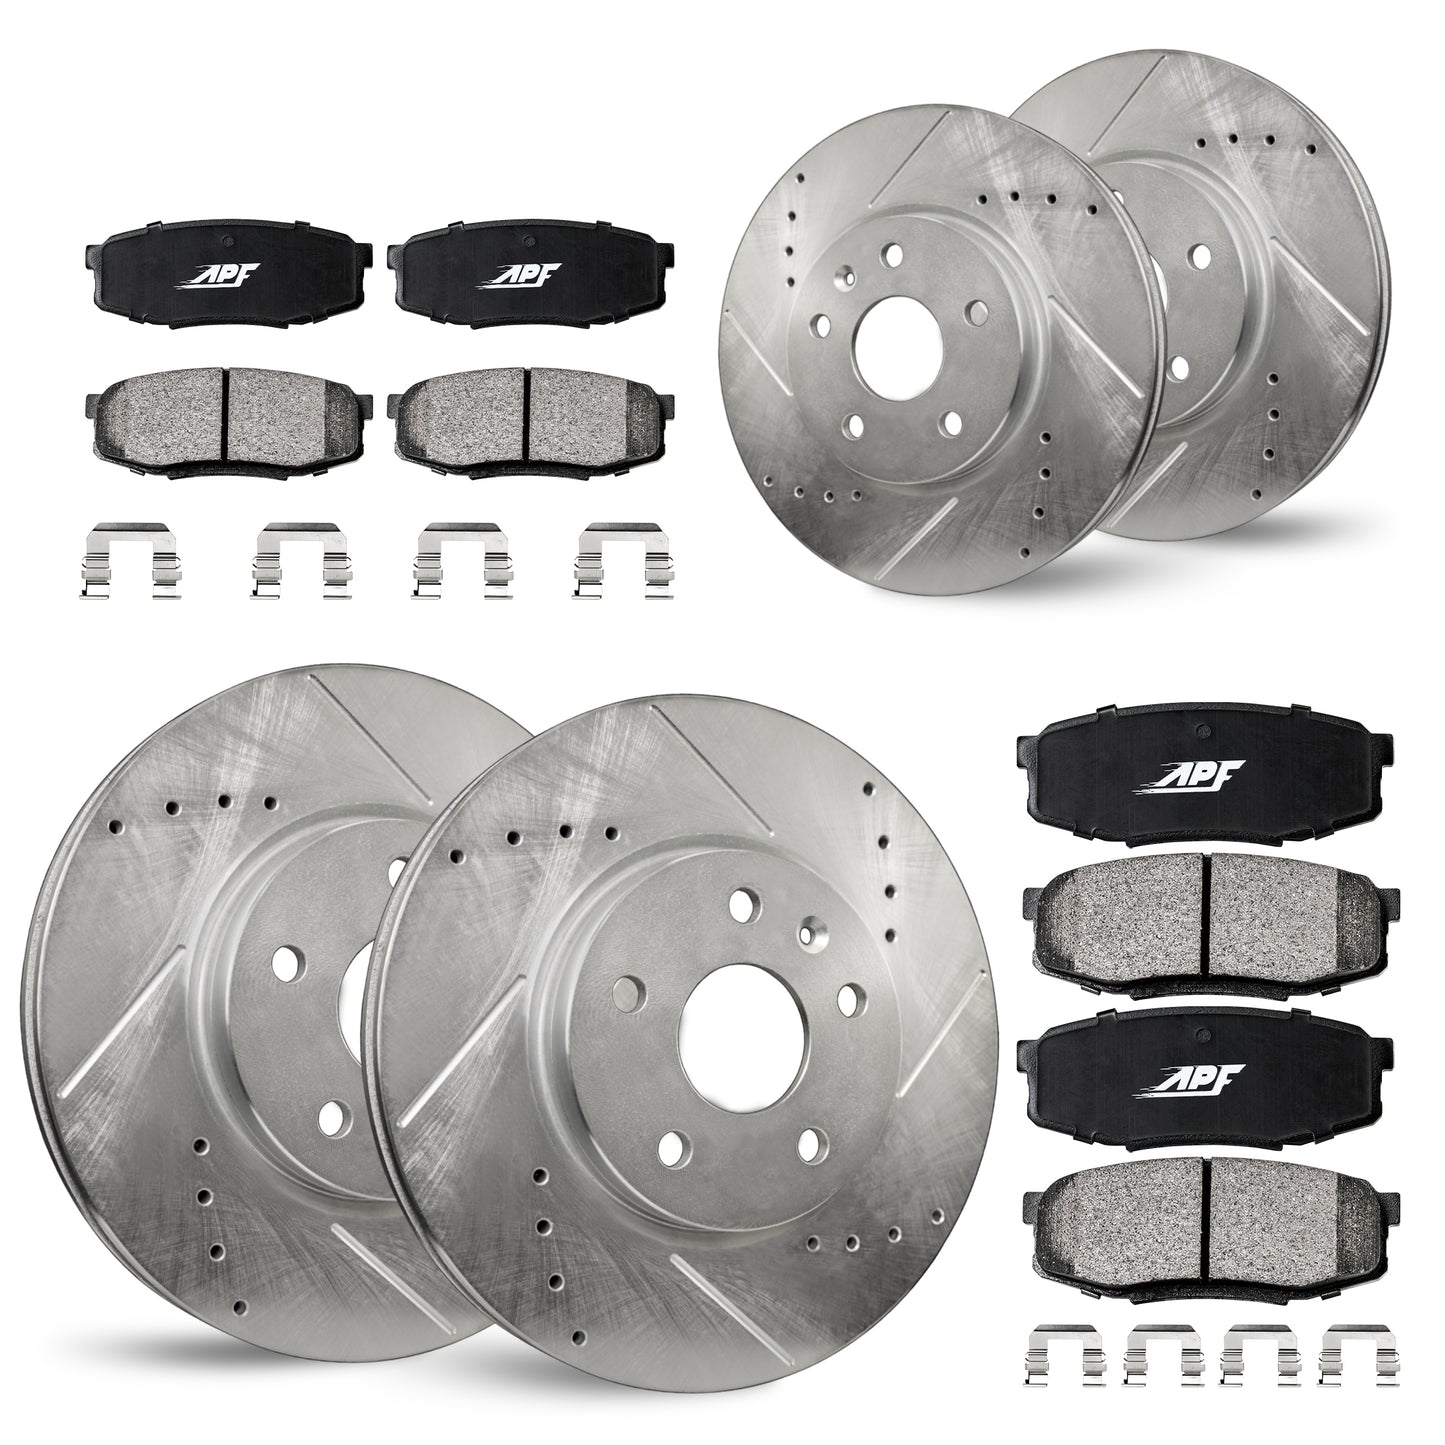 APF Full Kit compatible with Scion tC 2005-2010 | Zinc Drilled Slotted Rotors with Ceramic Carbon Fiber Brake Pads